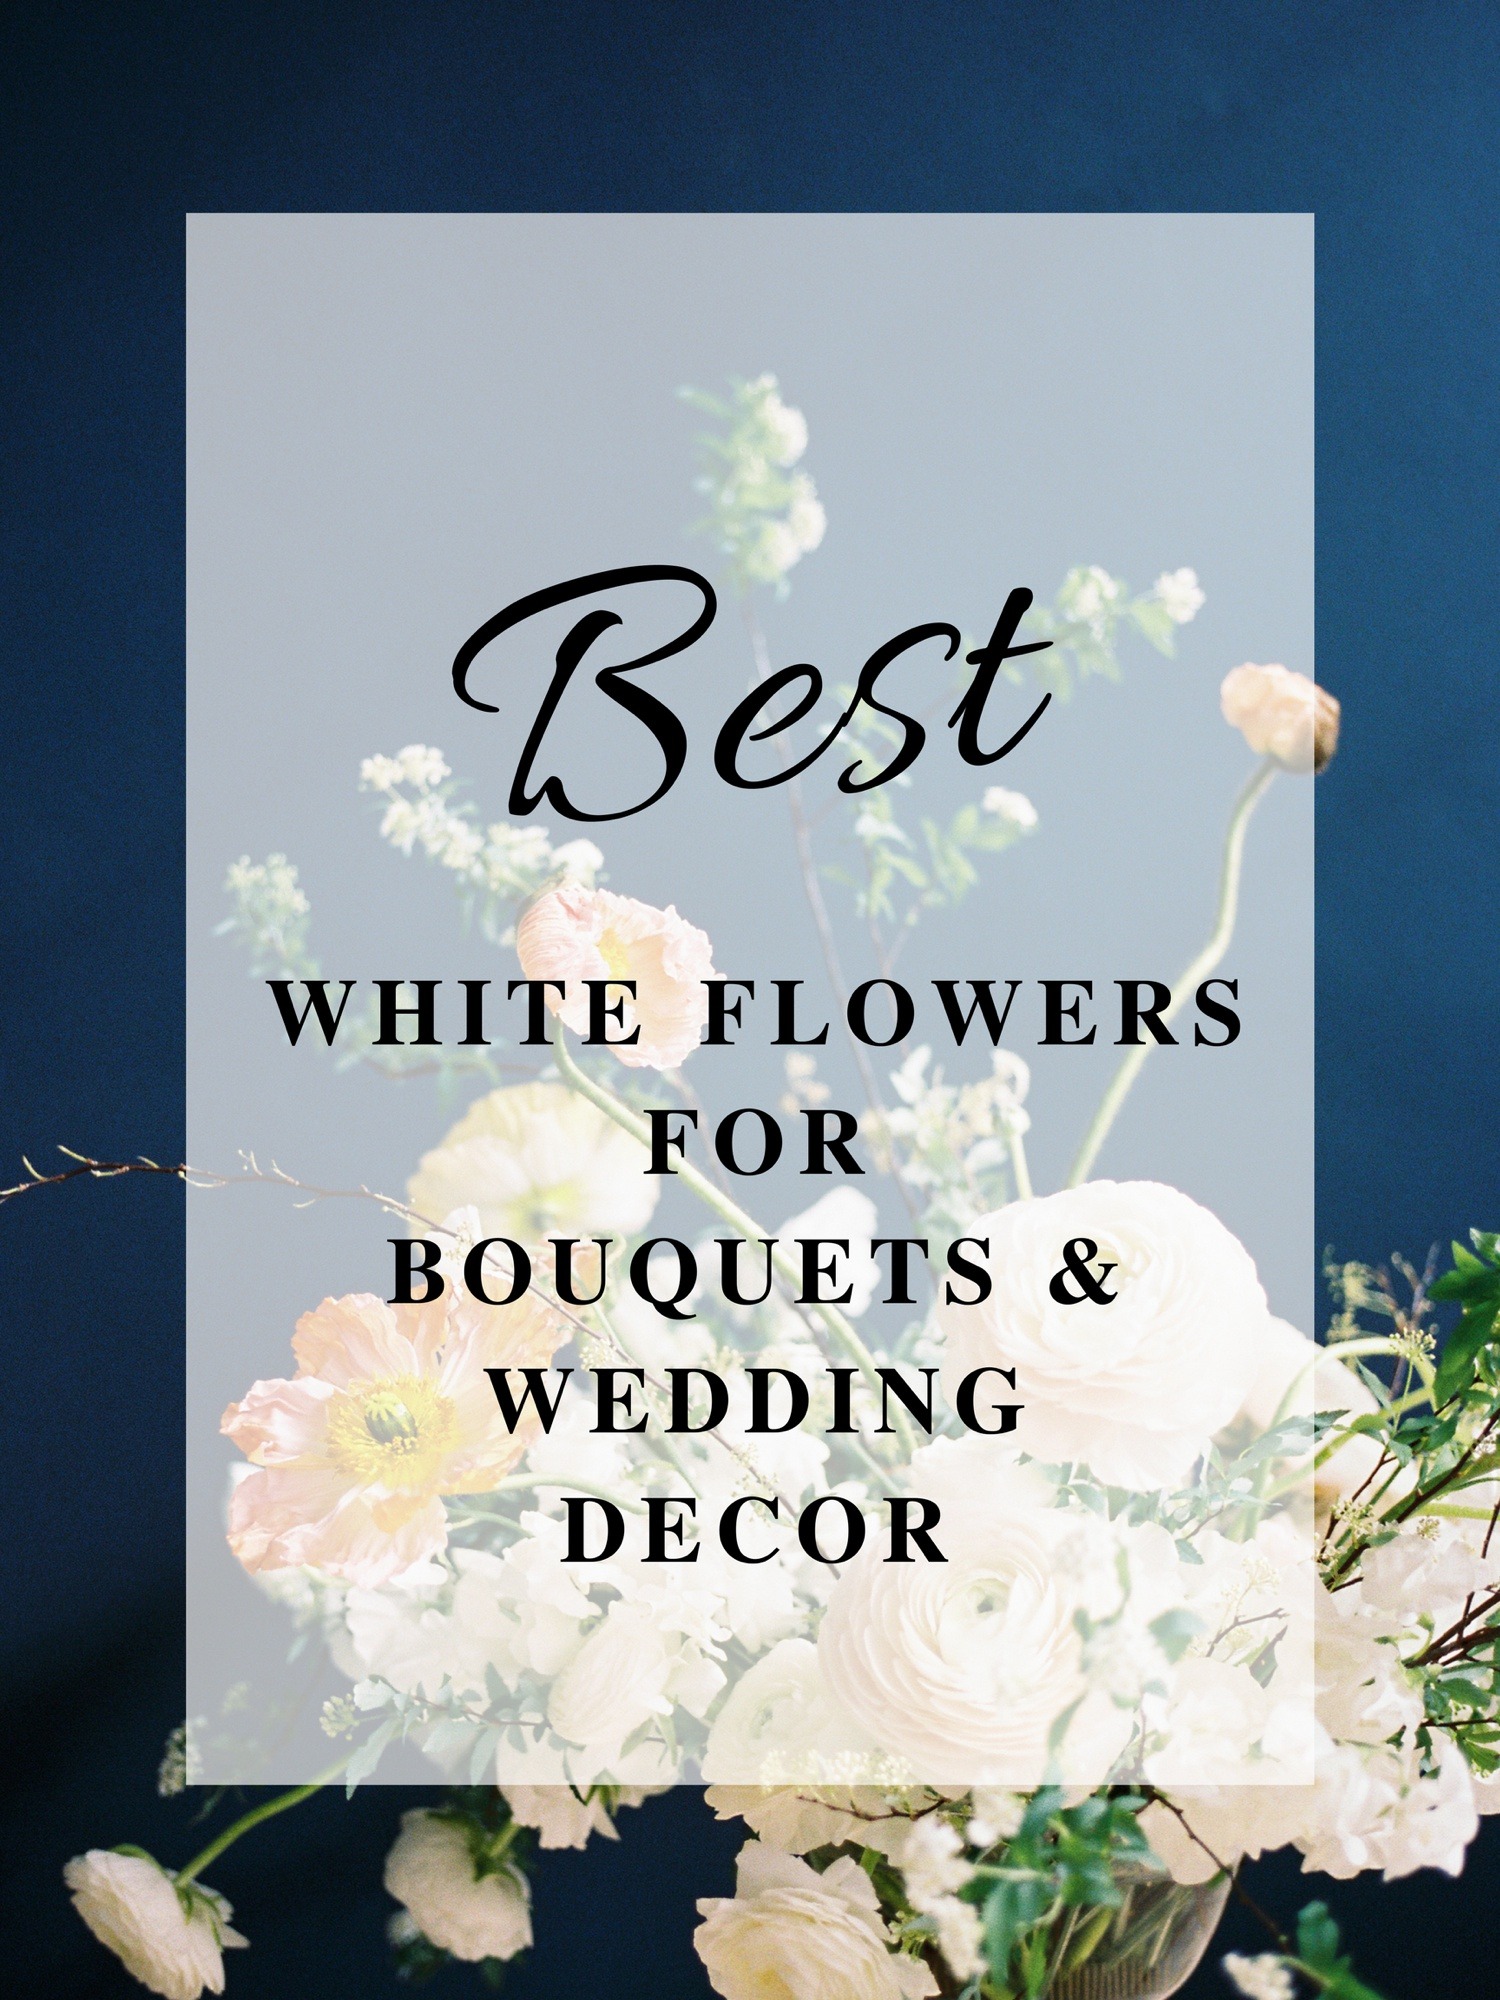 Best White Flowers for Bouquets and Wedding Decor | Ohio Florist